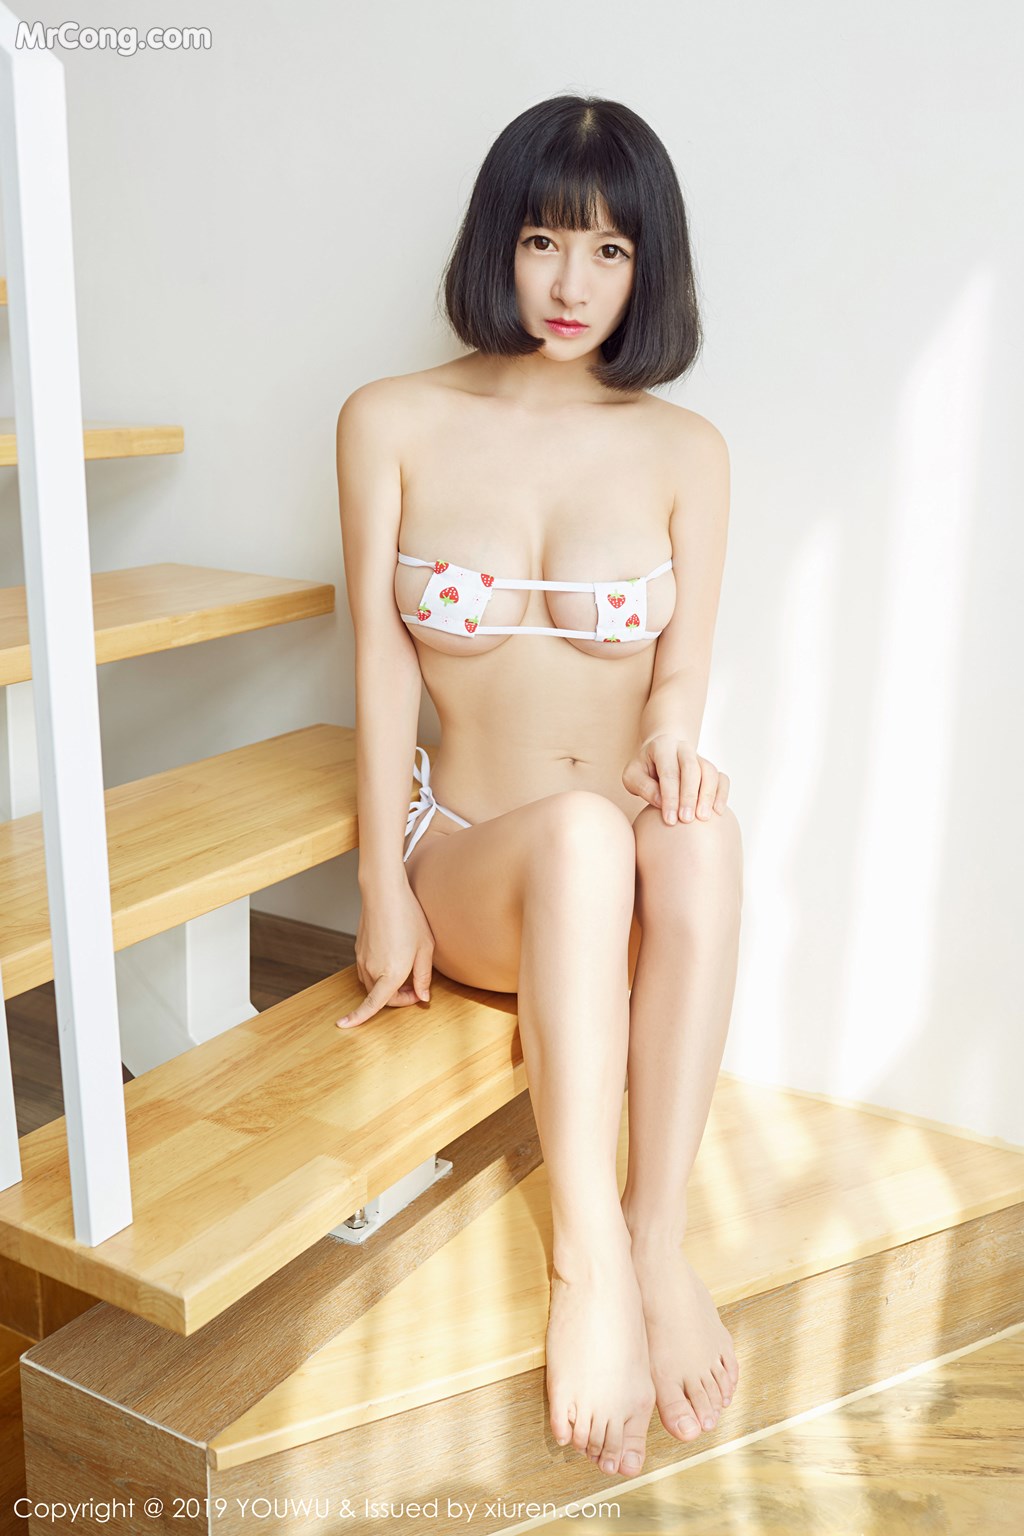 YouWu Vol.146: Xiao Tan Ge (小 探戈 -) (46 pictures)